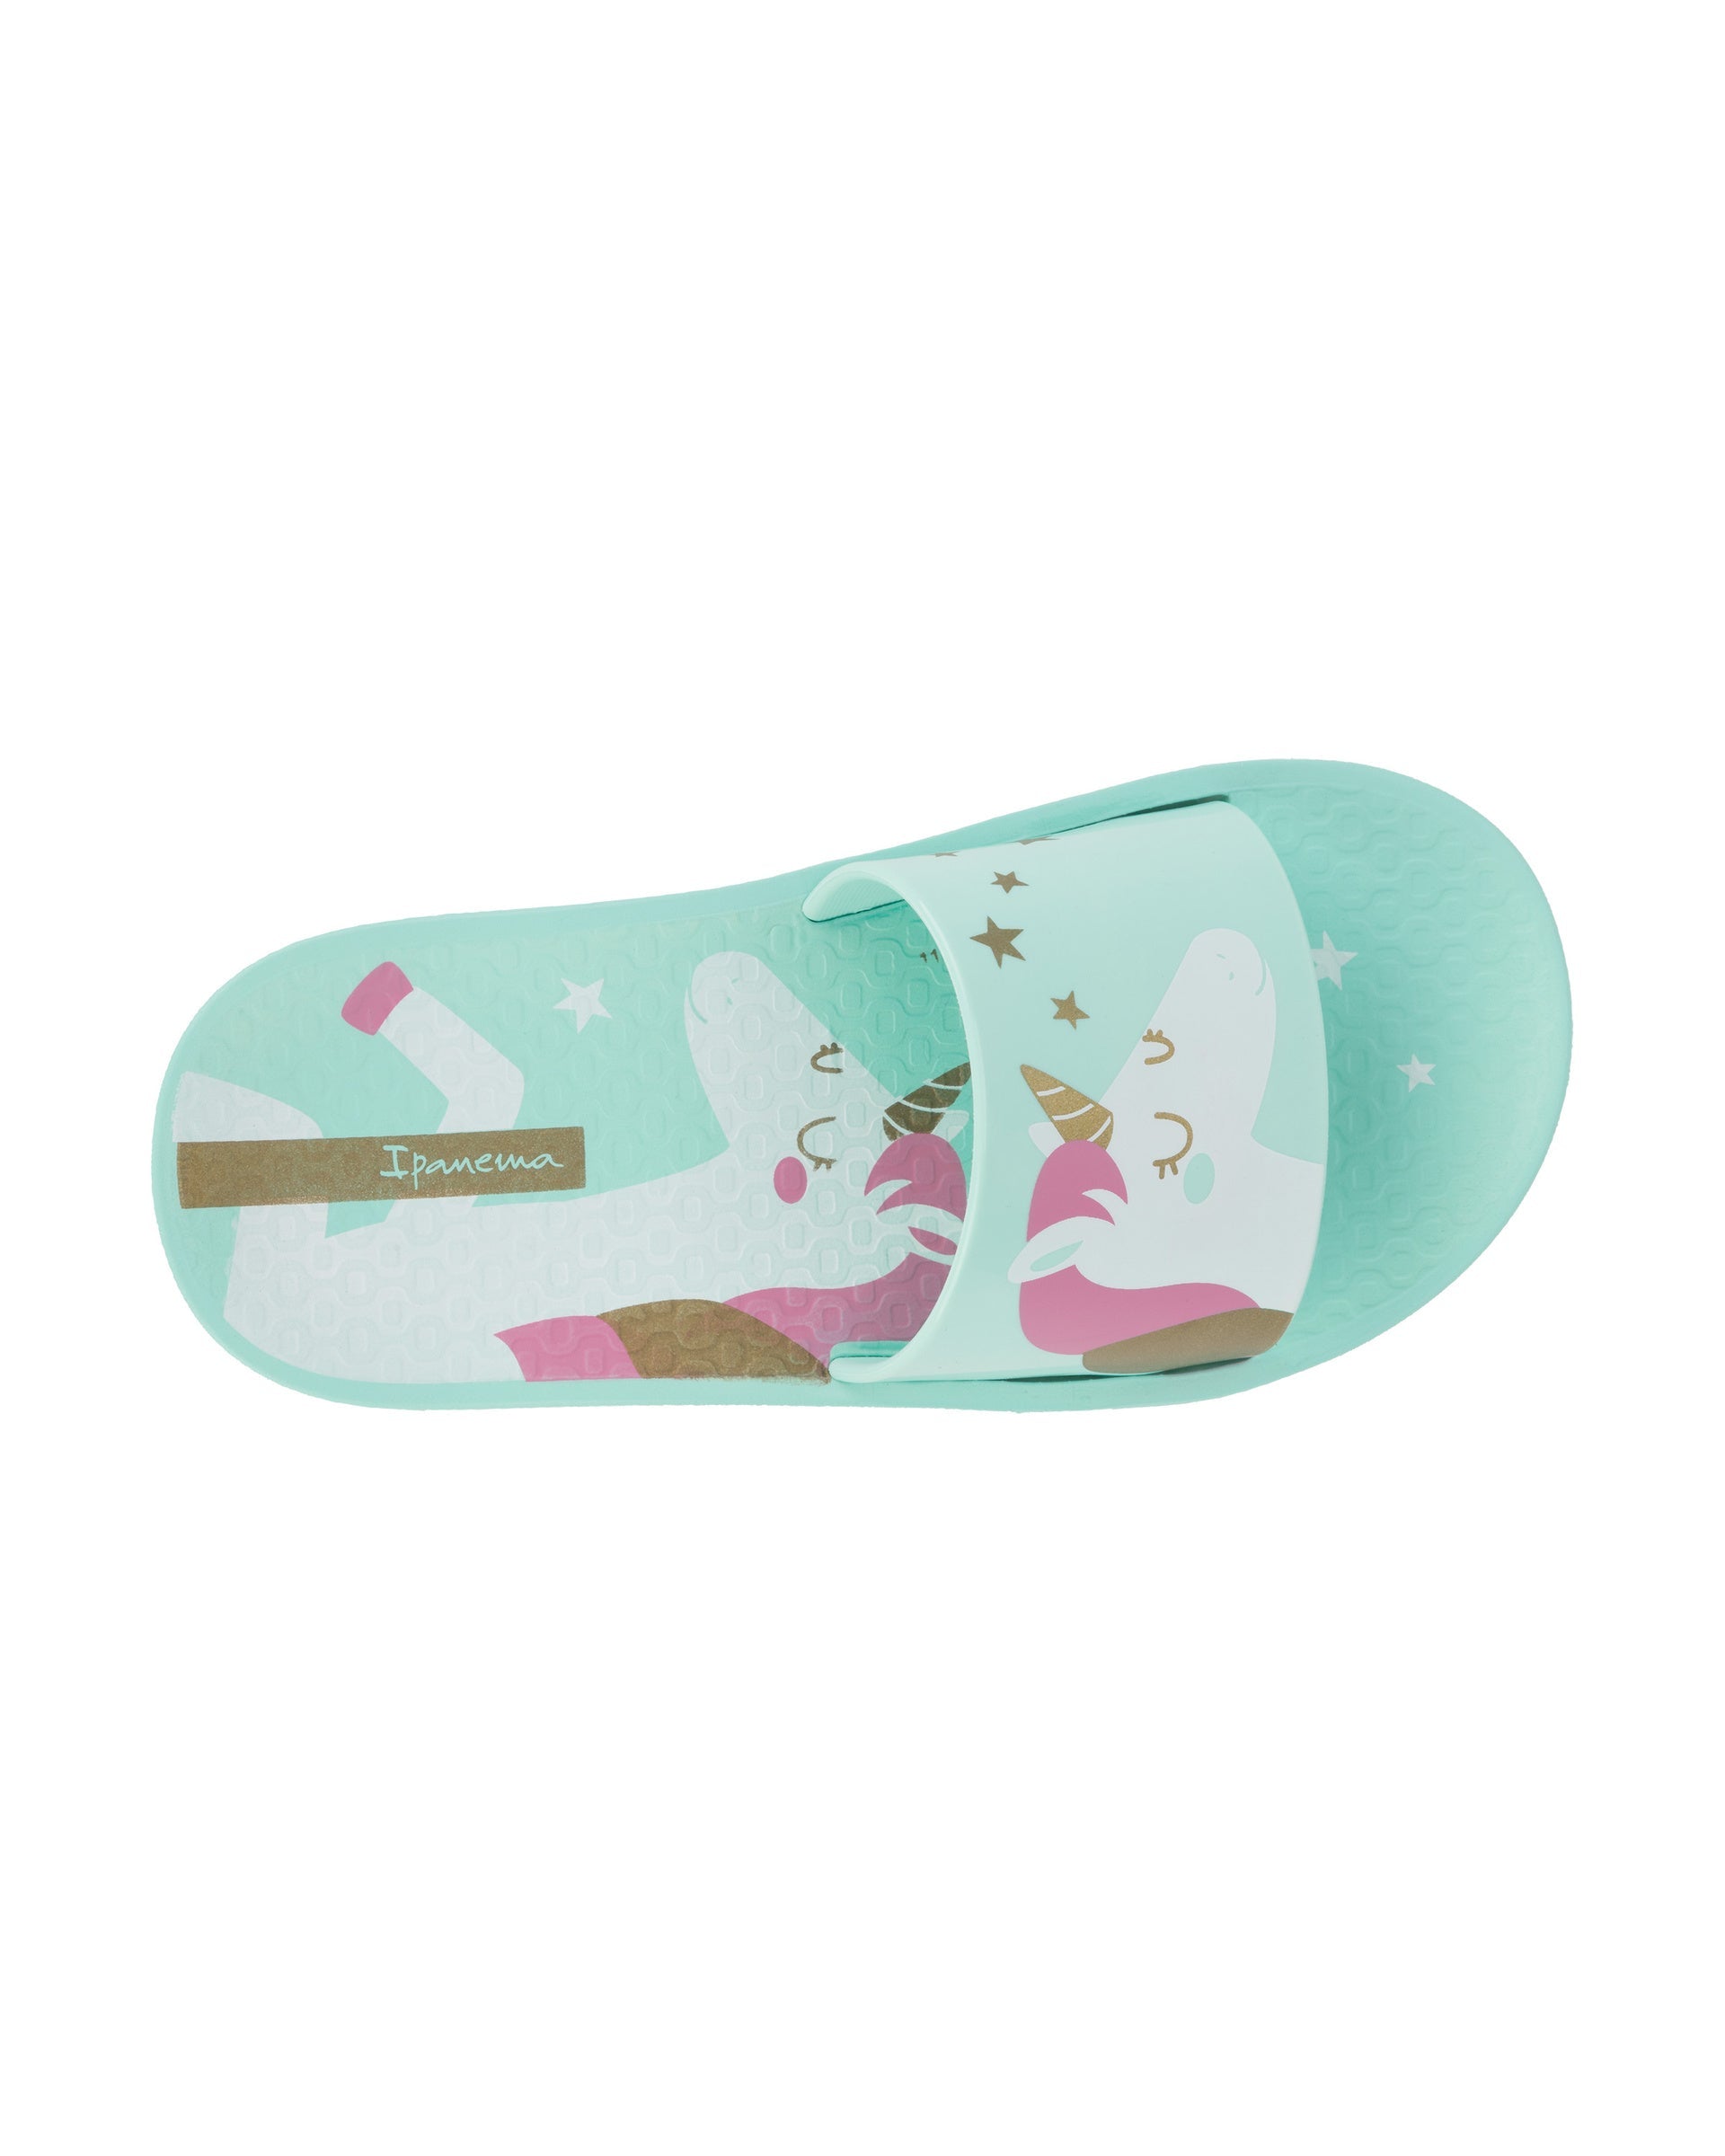 Top view of a green Ipanema Urban kids slide with a unicorn on the upper.